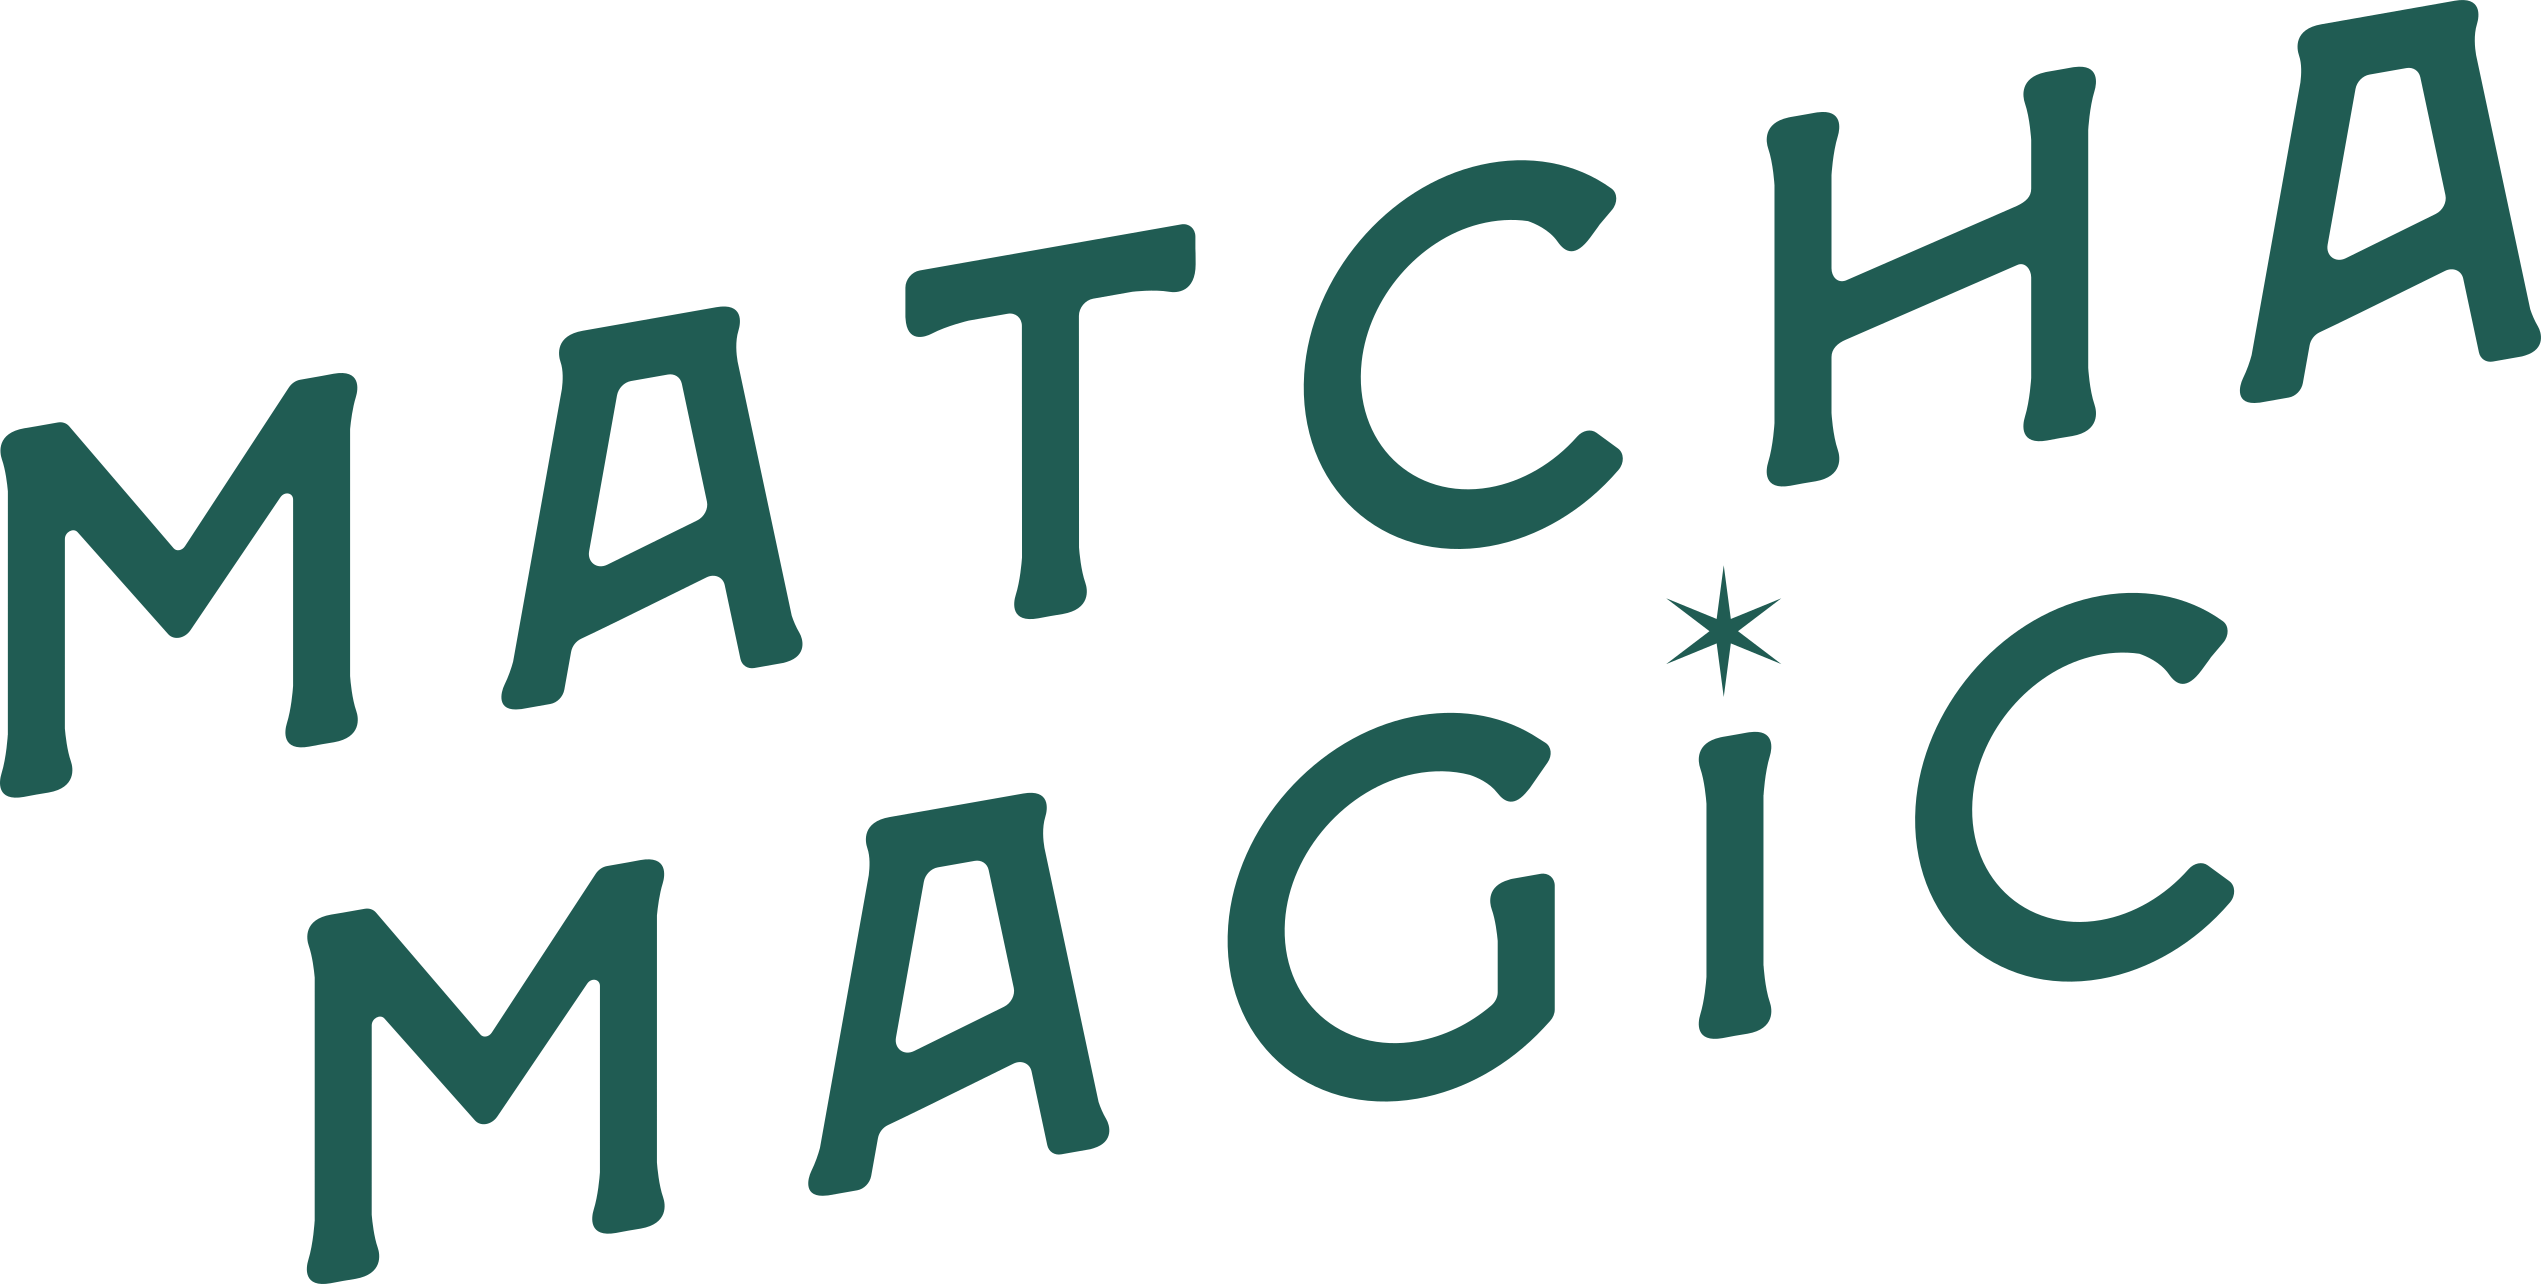 Women-owned Matcha Magic explores expansion